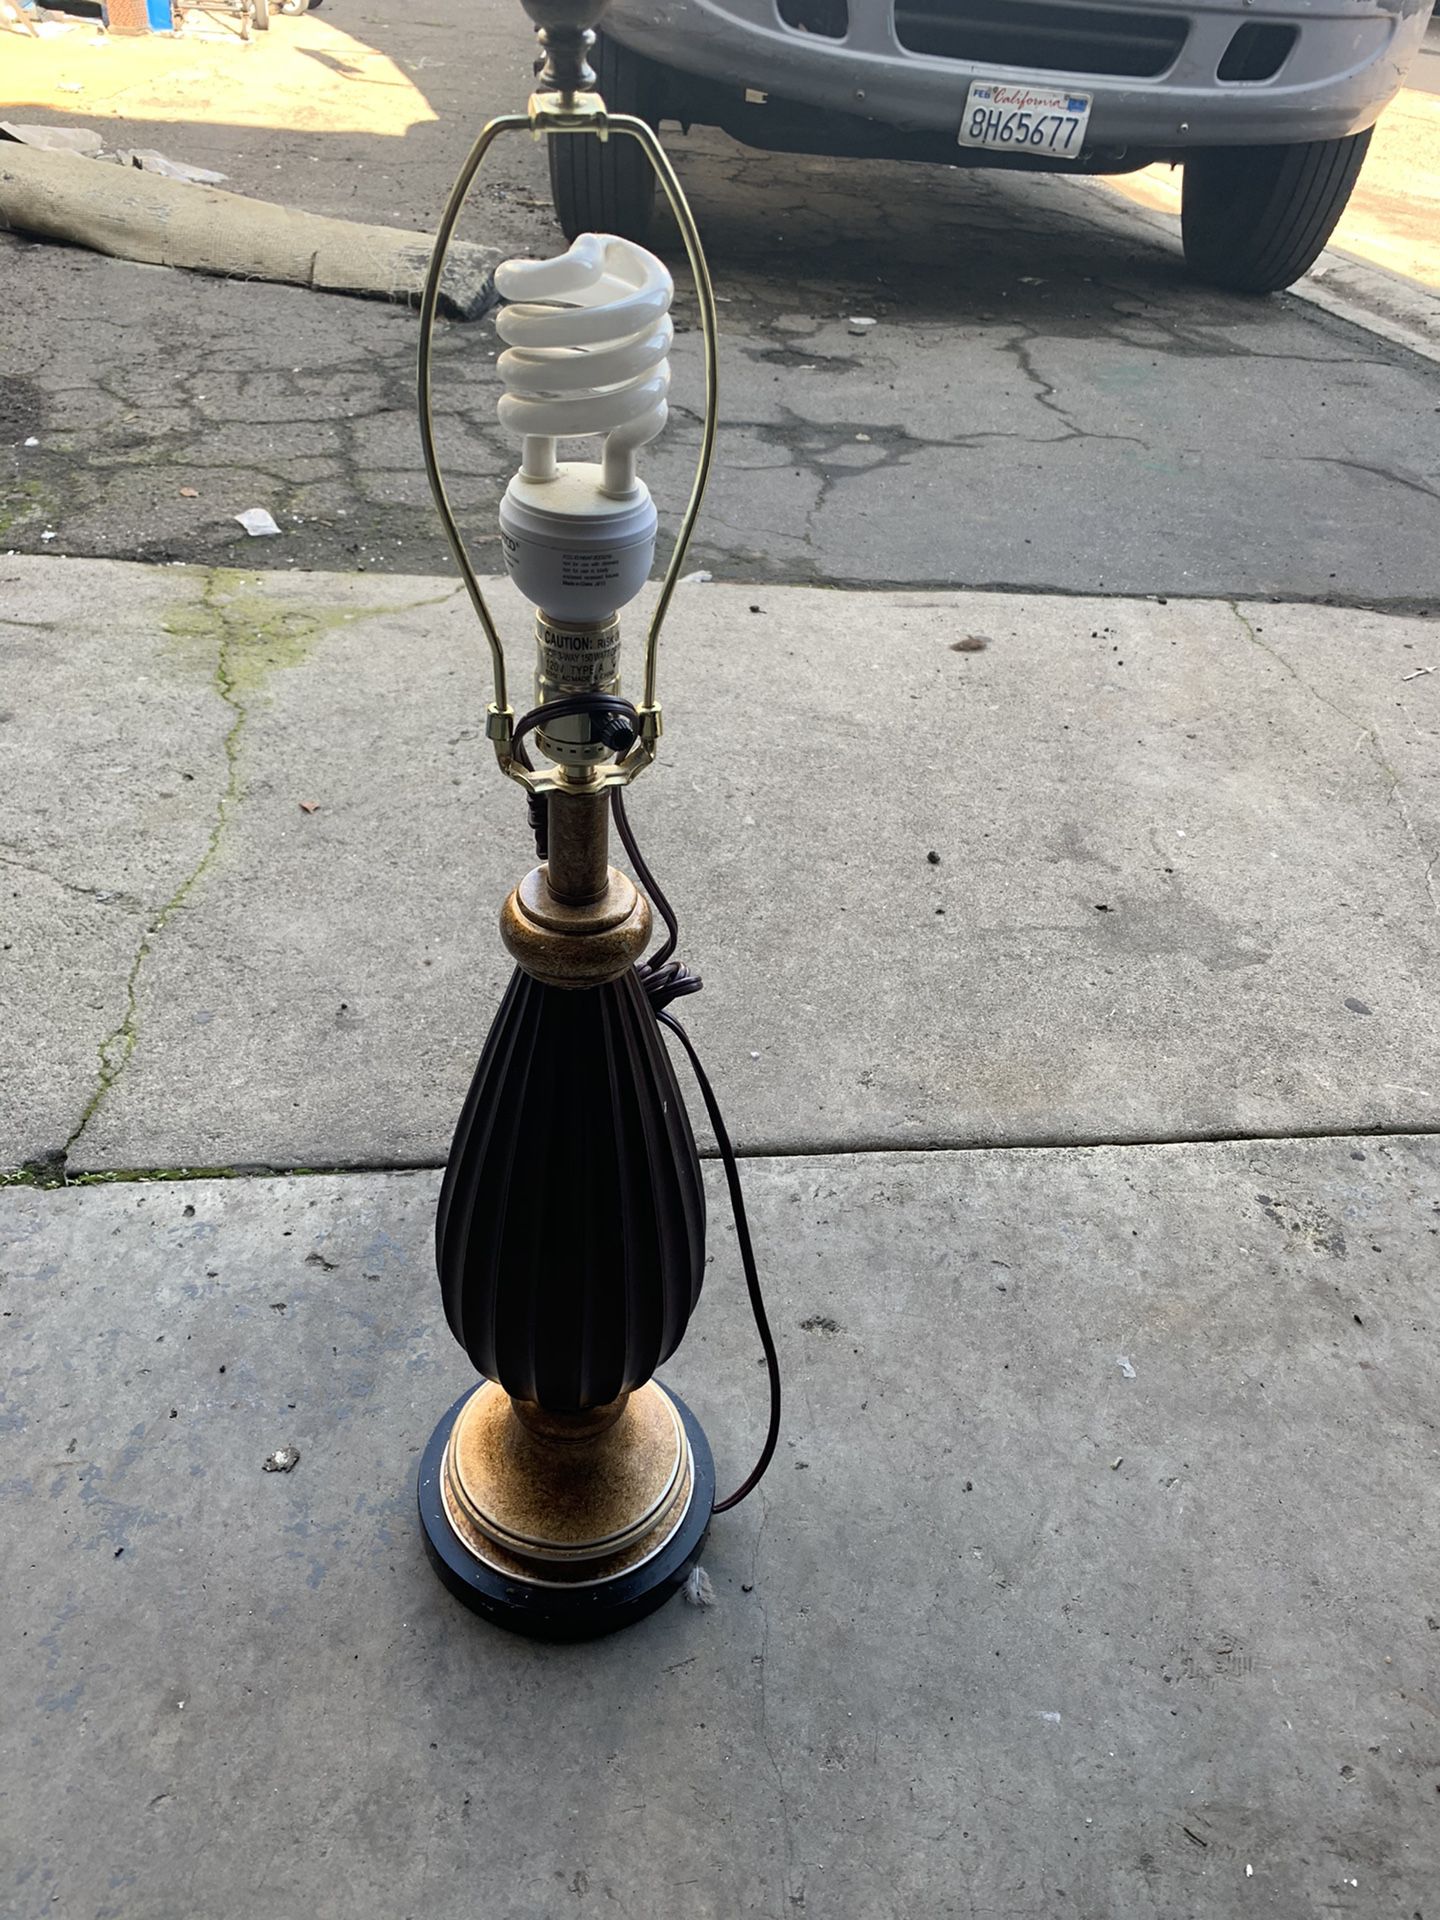 Used hotel lamps